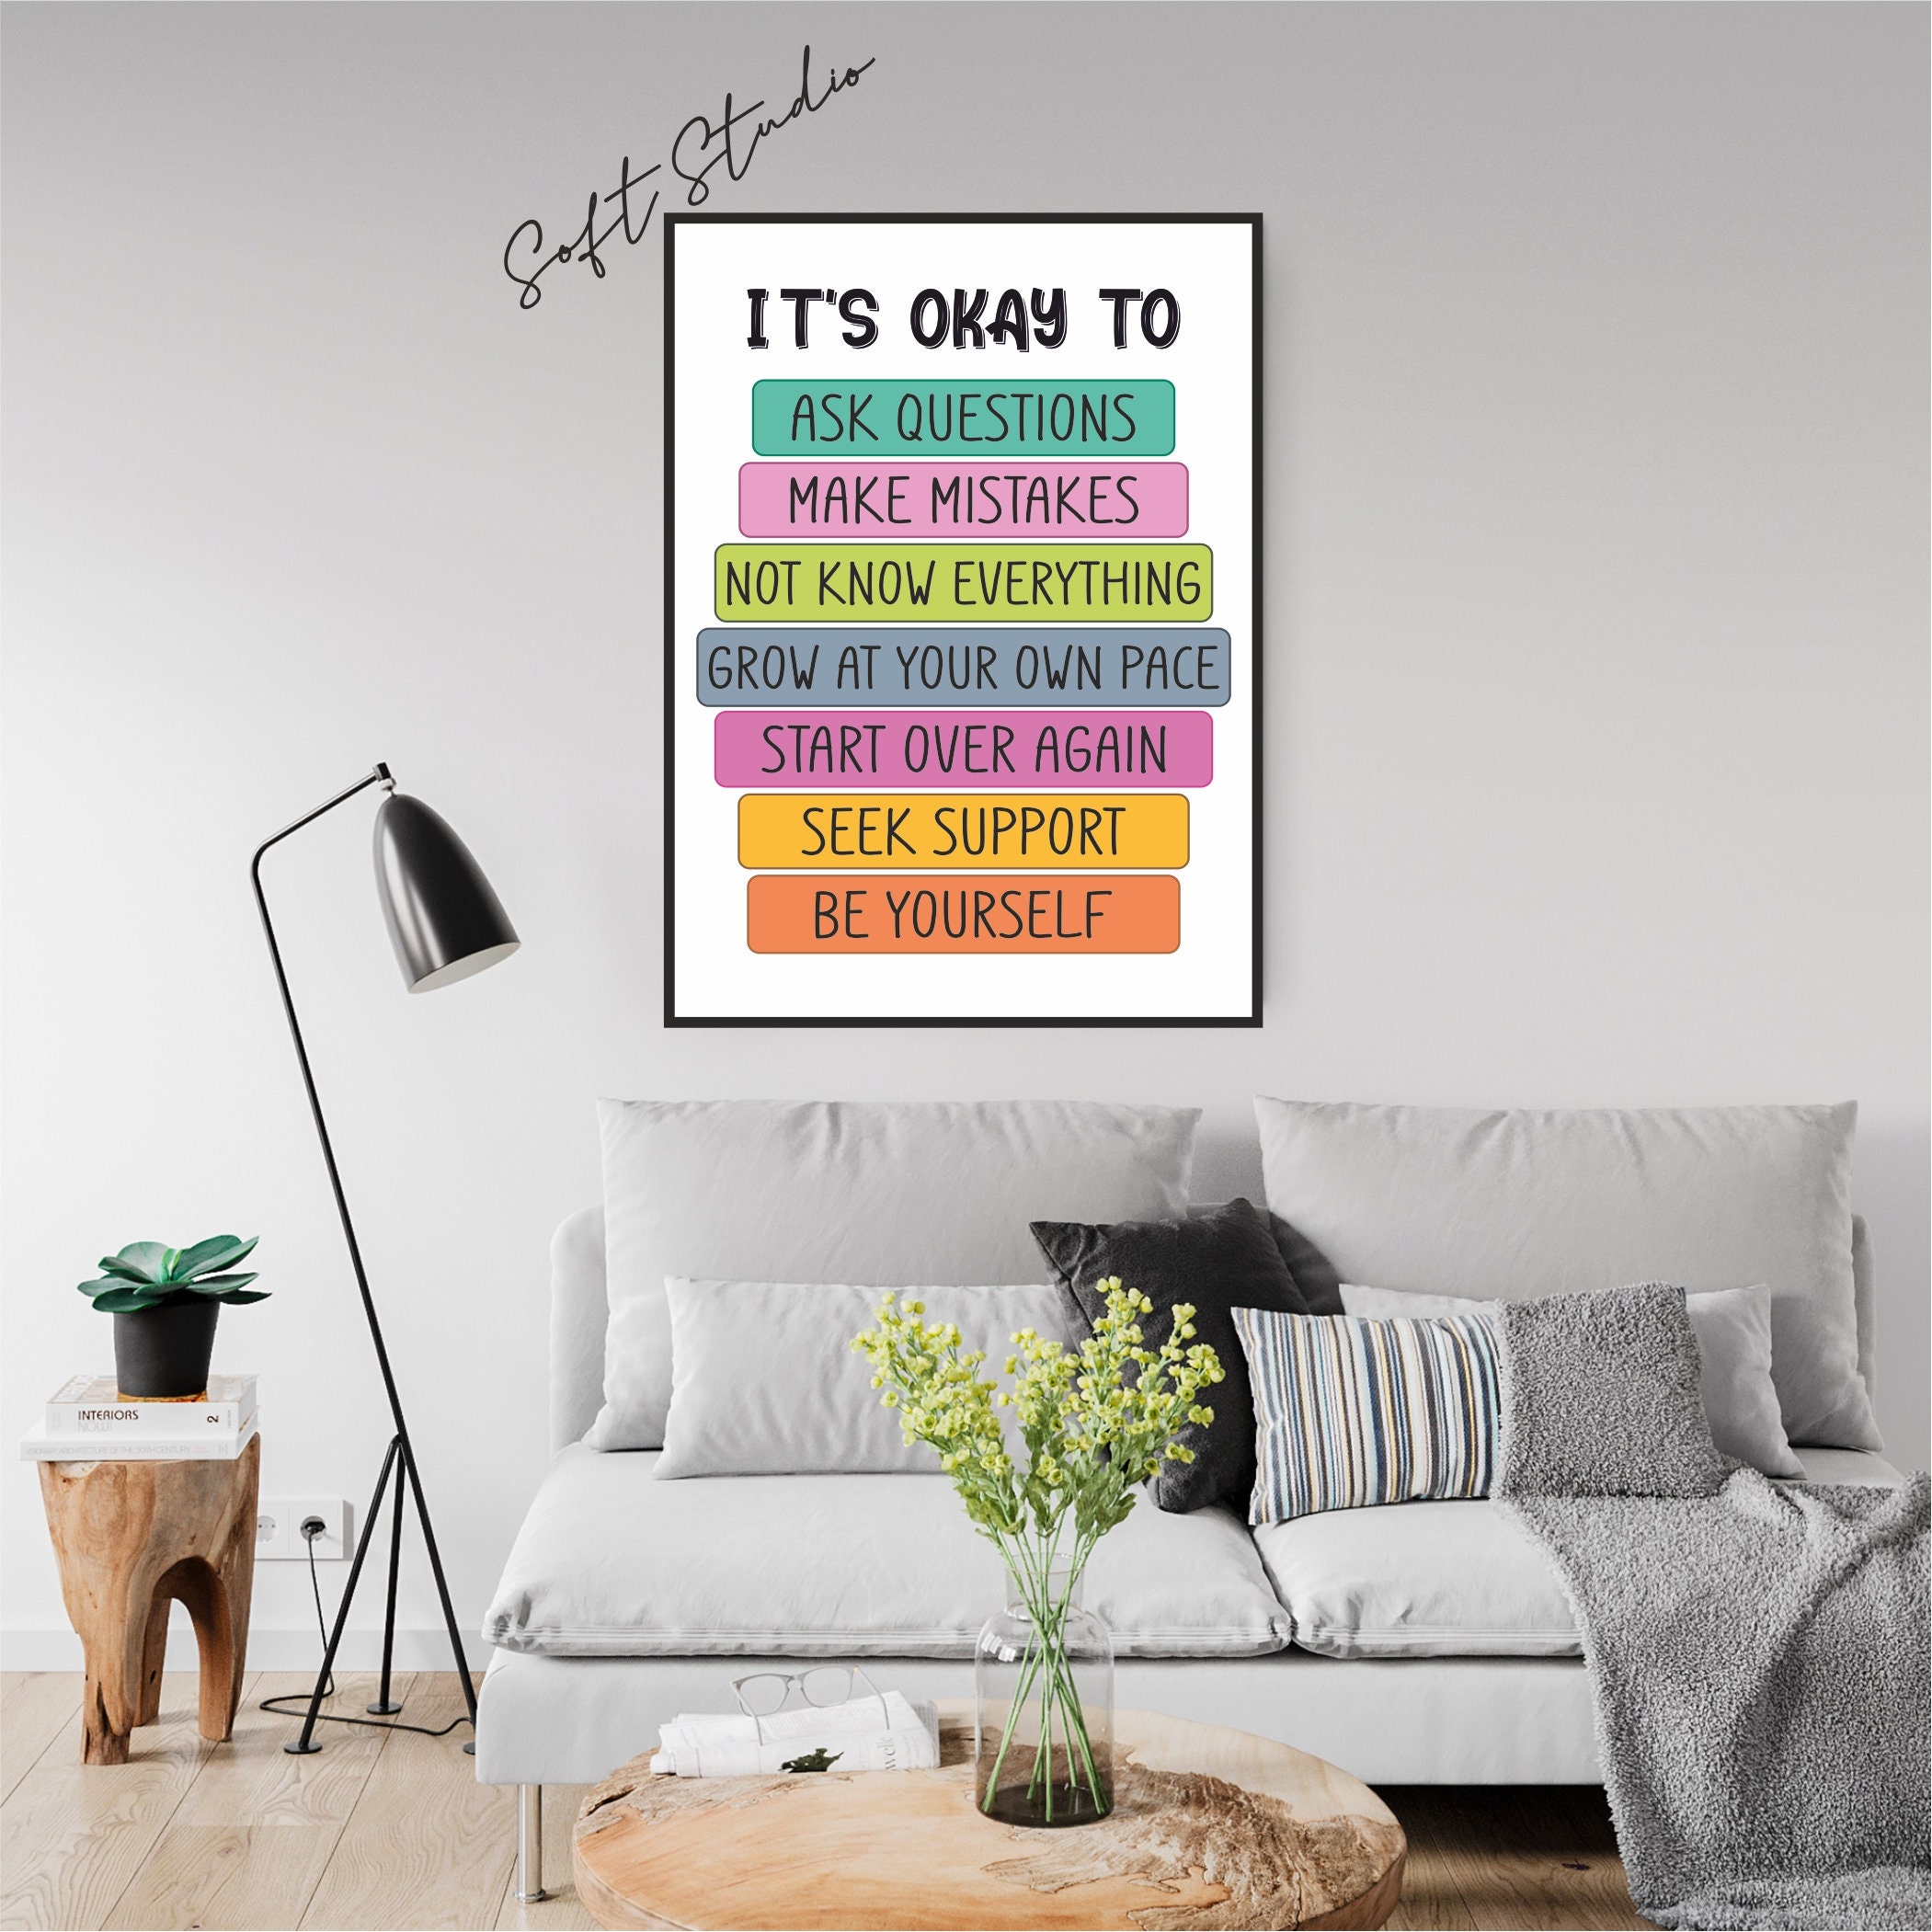 Small Hands Change the World, Diversity Wall Art, Printable